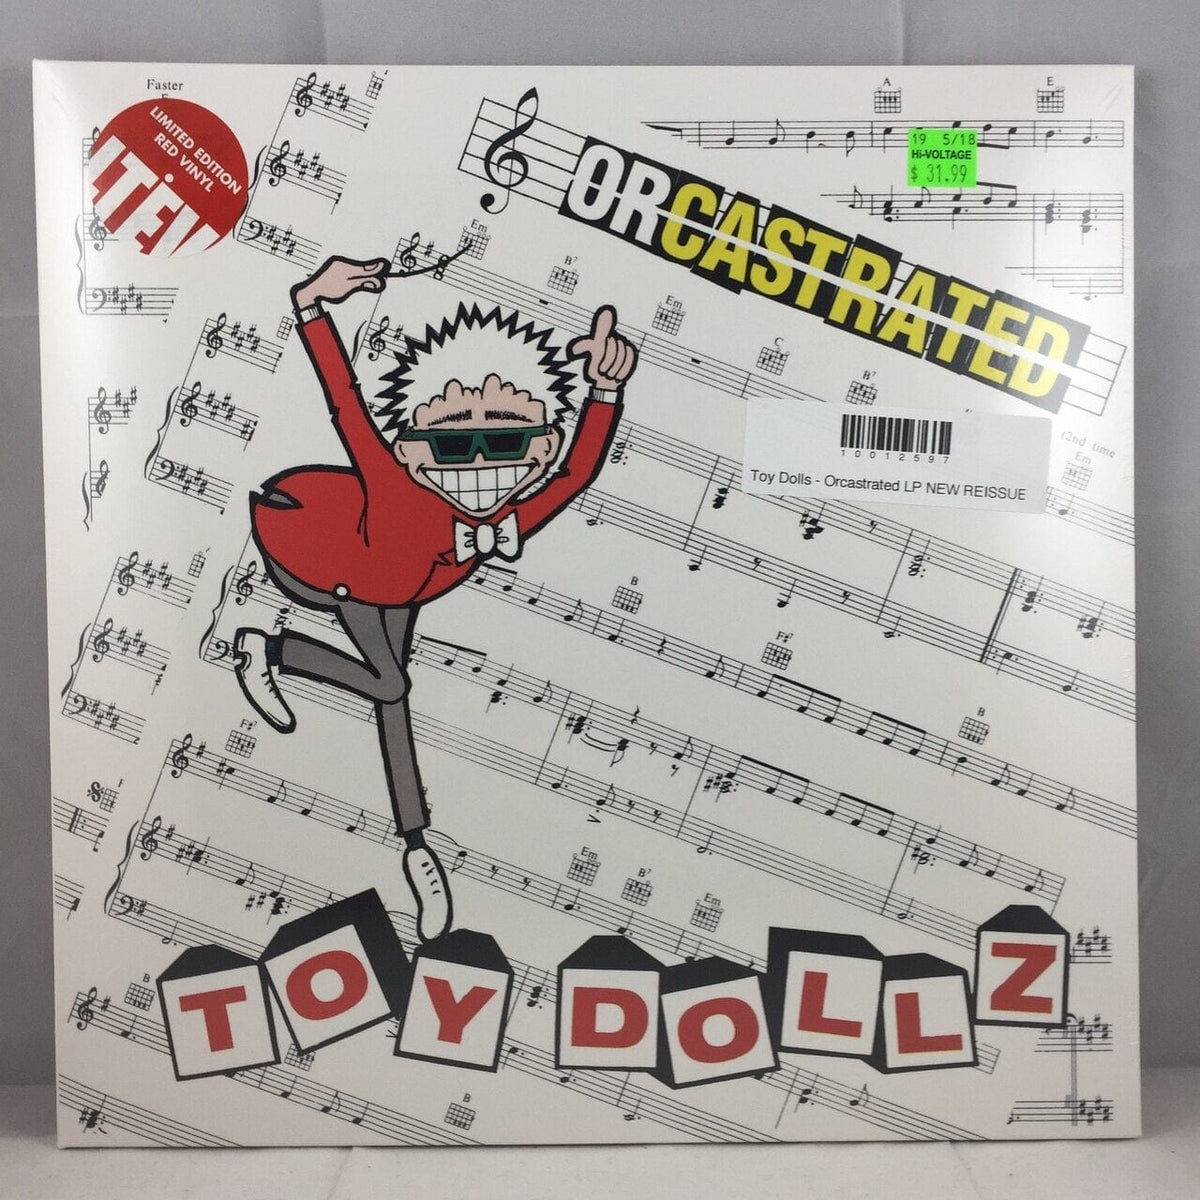 THE  TOY DOLLz ORCASTRATED LP vinyl